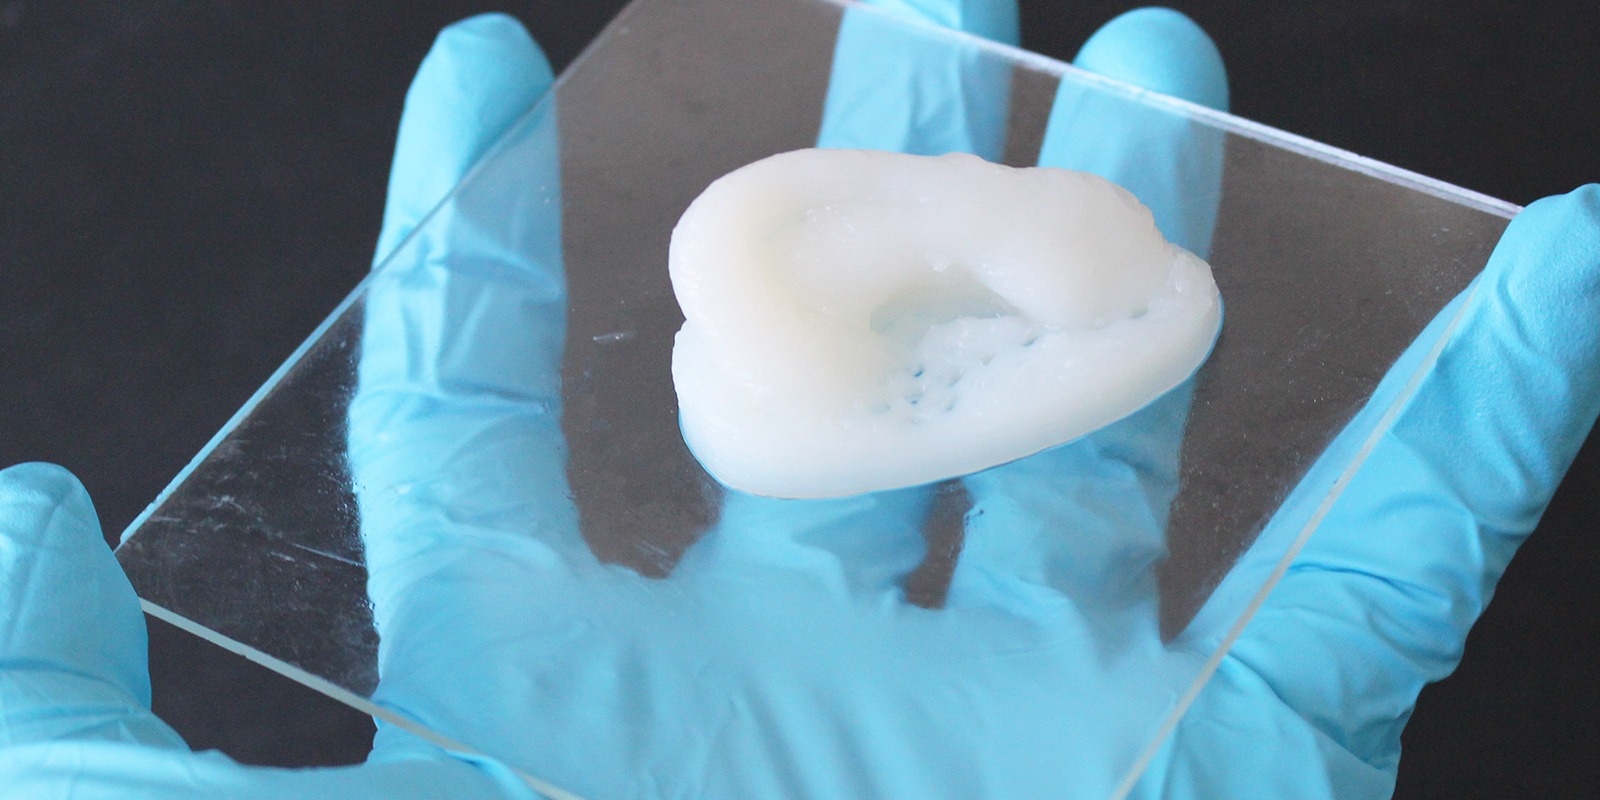 A 3D-printed ear cartilage imitation made of the cellulose composite material. (Photograph: Michael Hausmann / ETH Zurich / Empa)